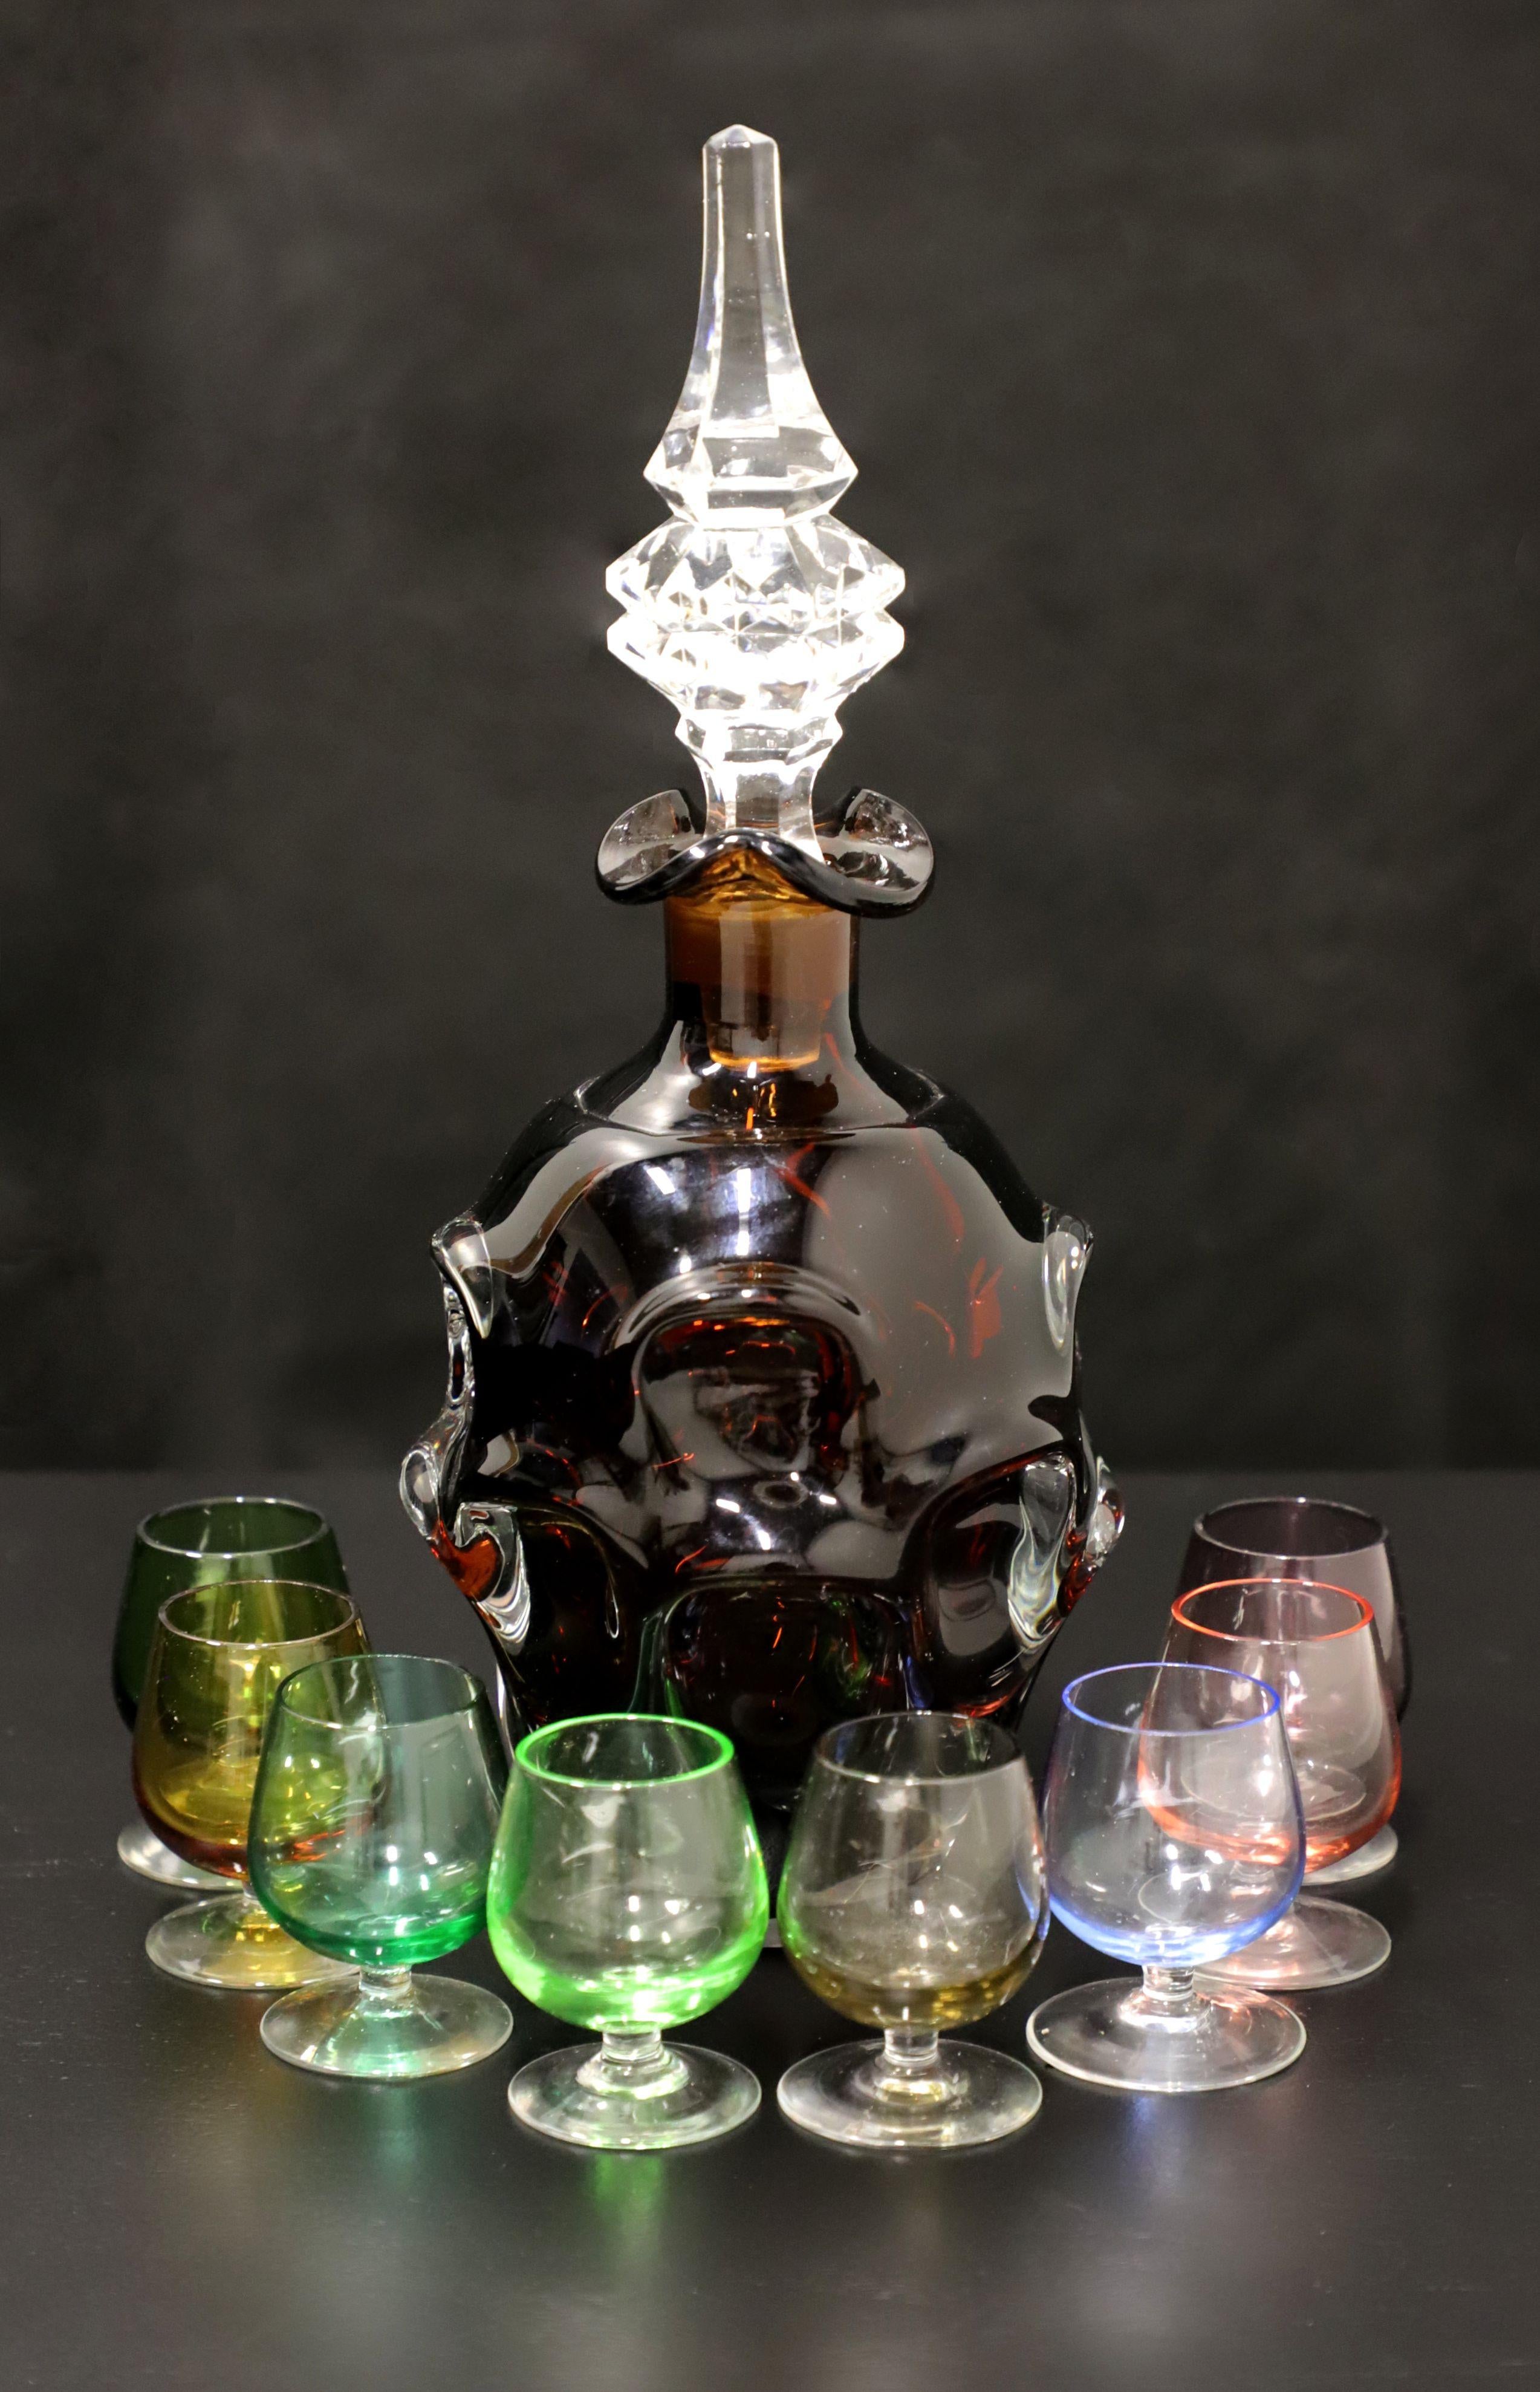 A Mid 20th Century amber glass decanter with stopper and eight various color cordial glasses. Amber glass decanter with blown circular bubble-like pattern and clear diamond-like cut finial shaped stopper. Includes eight complimenting various color